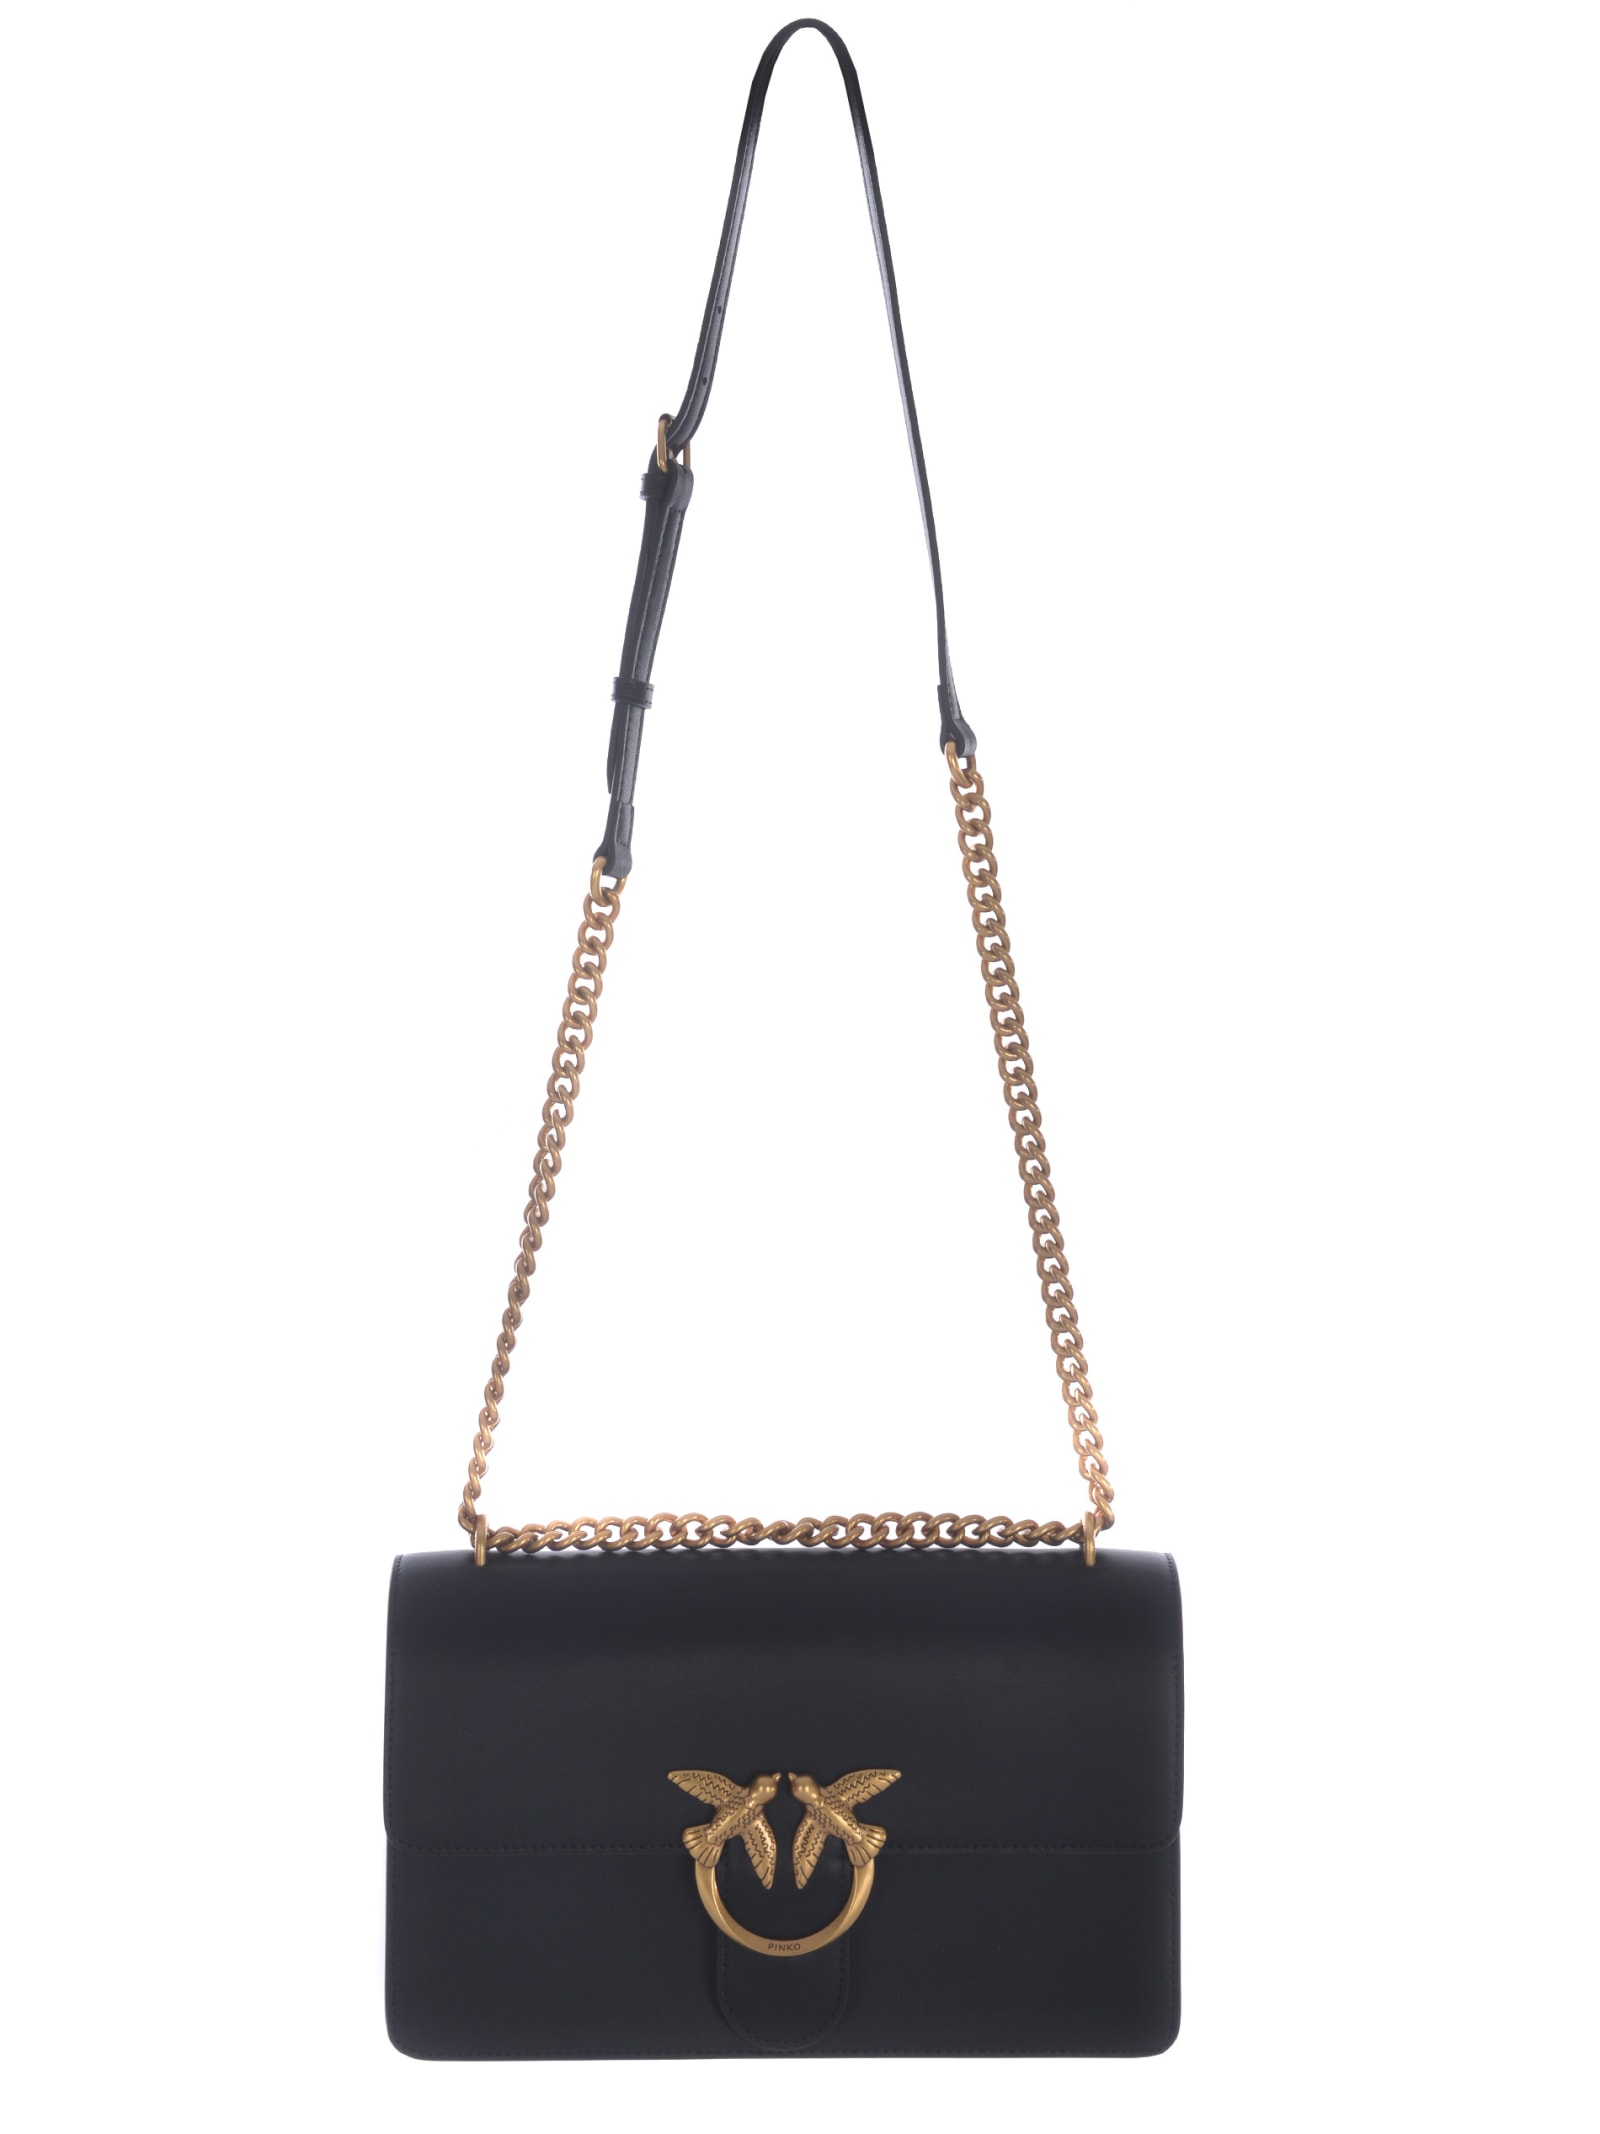 Shop Pinko Bag  Love One Classic Made Of Soft Leather In Nero Oro